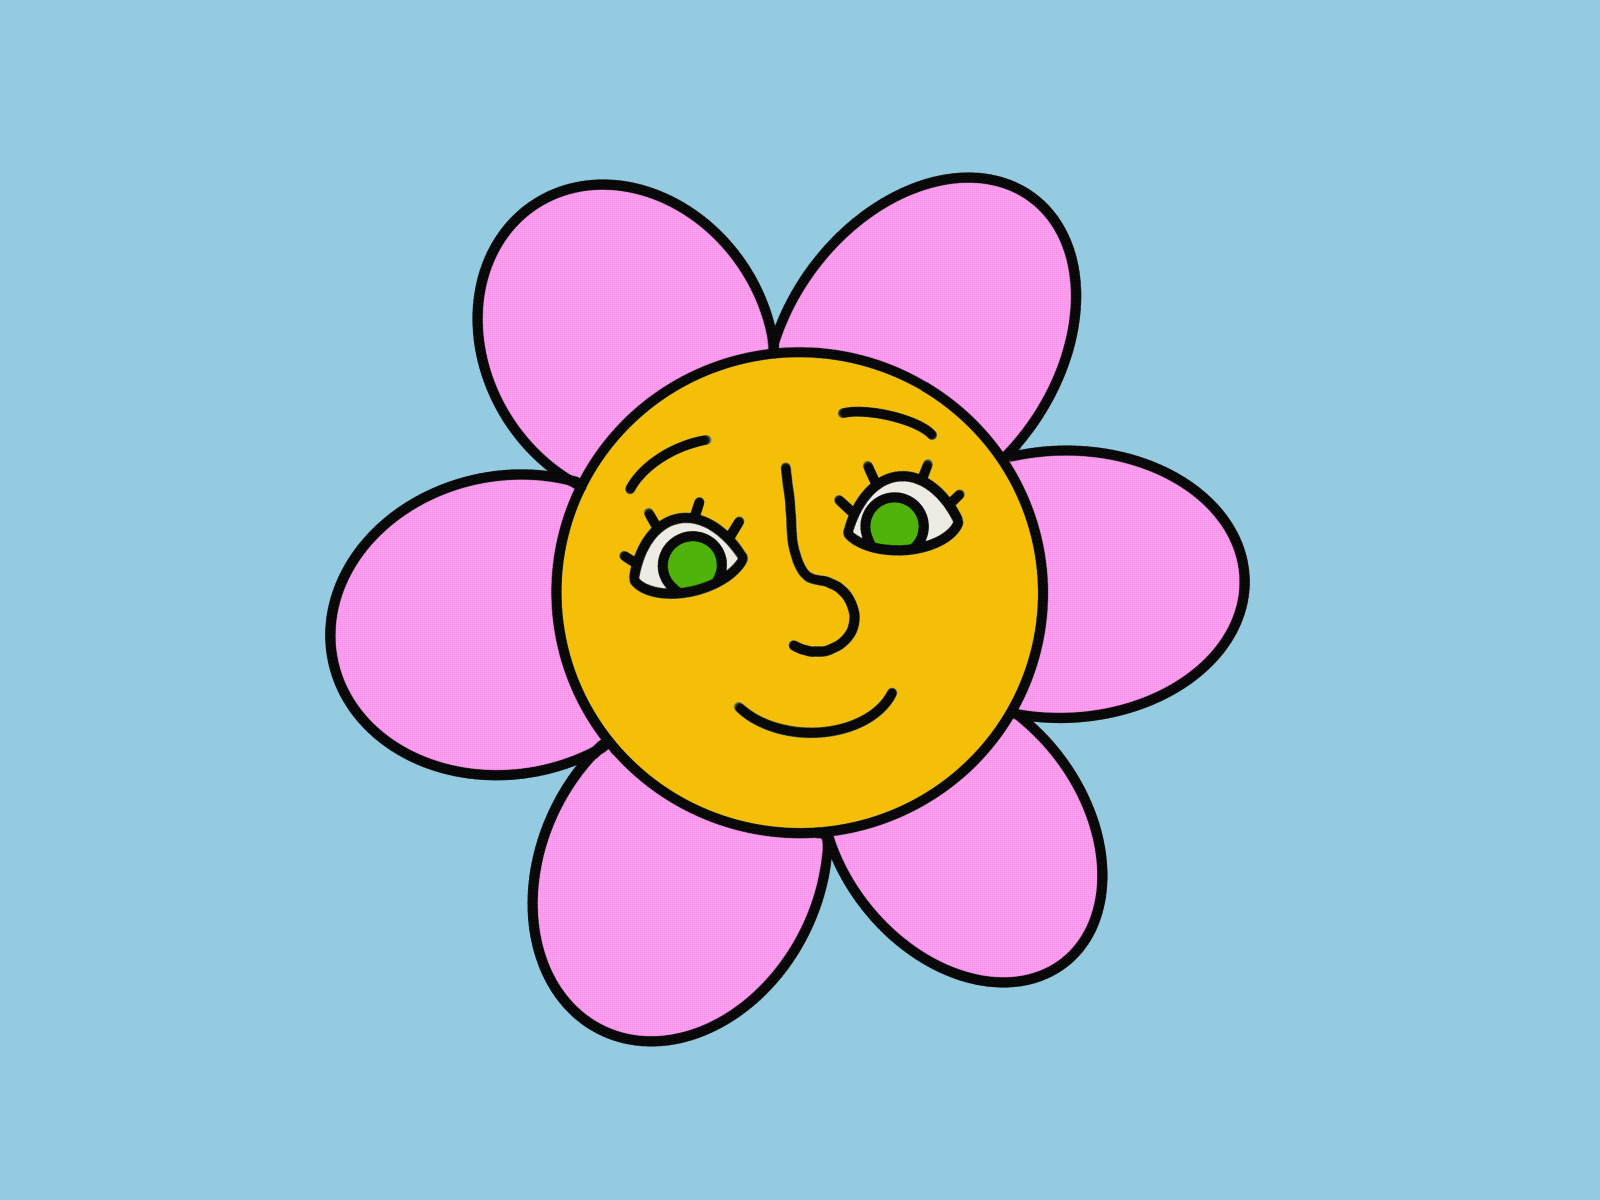 A Sneeze-Face Flower allergies animation childrens art colorful creative curious flower friendly happy homegoods illustration line art motion graphics playful sickday spring vibrant wellness whimsical